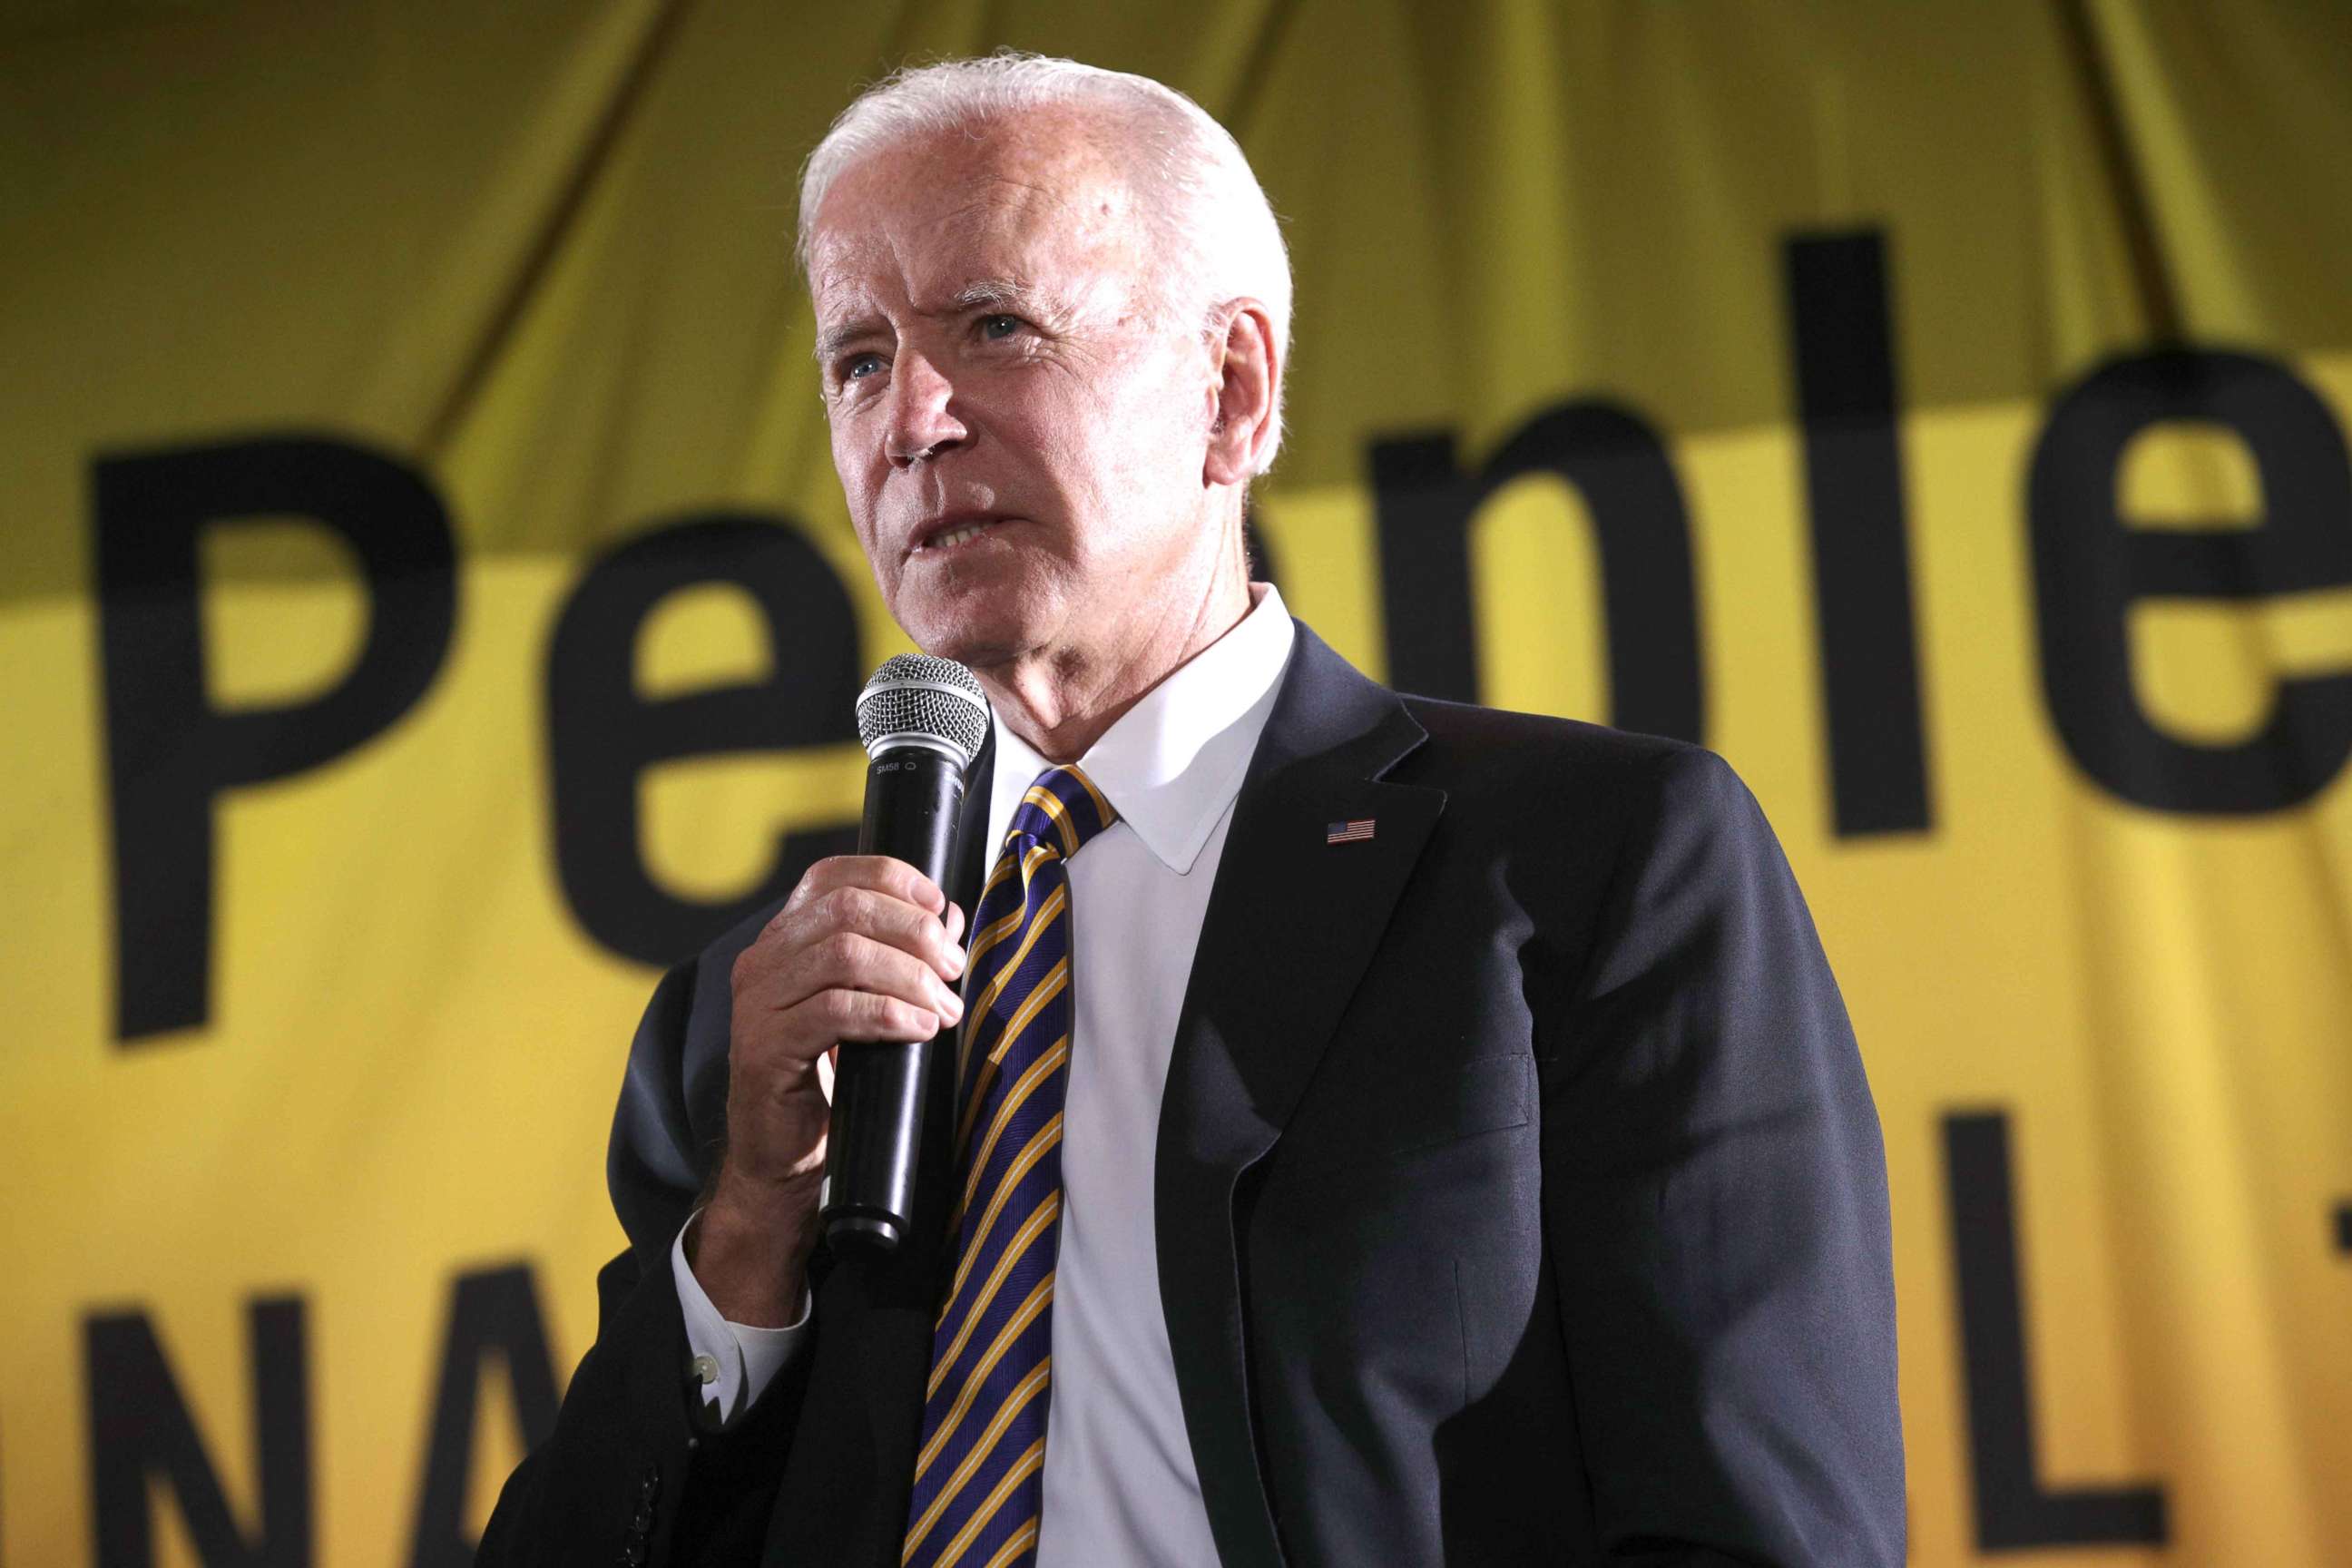 PHOTO: Former Vice President Joe Biden addresses the Moral Action Congress of the Poor People's Campaign, June 17, 2019, at Trinity Washington University in Washington, DC.